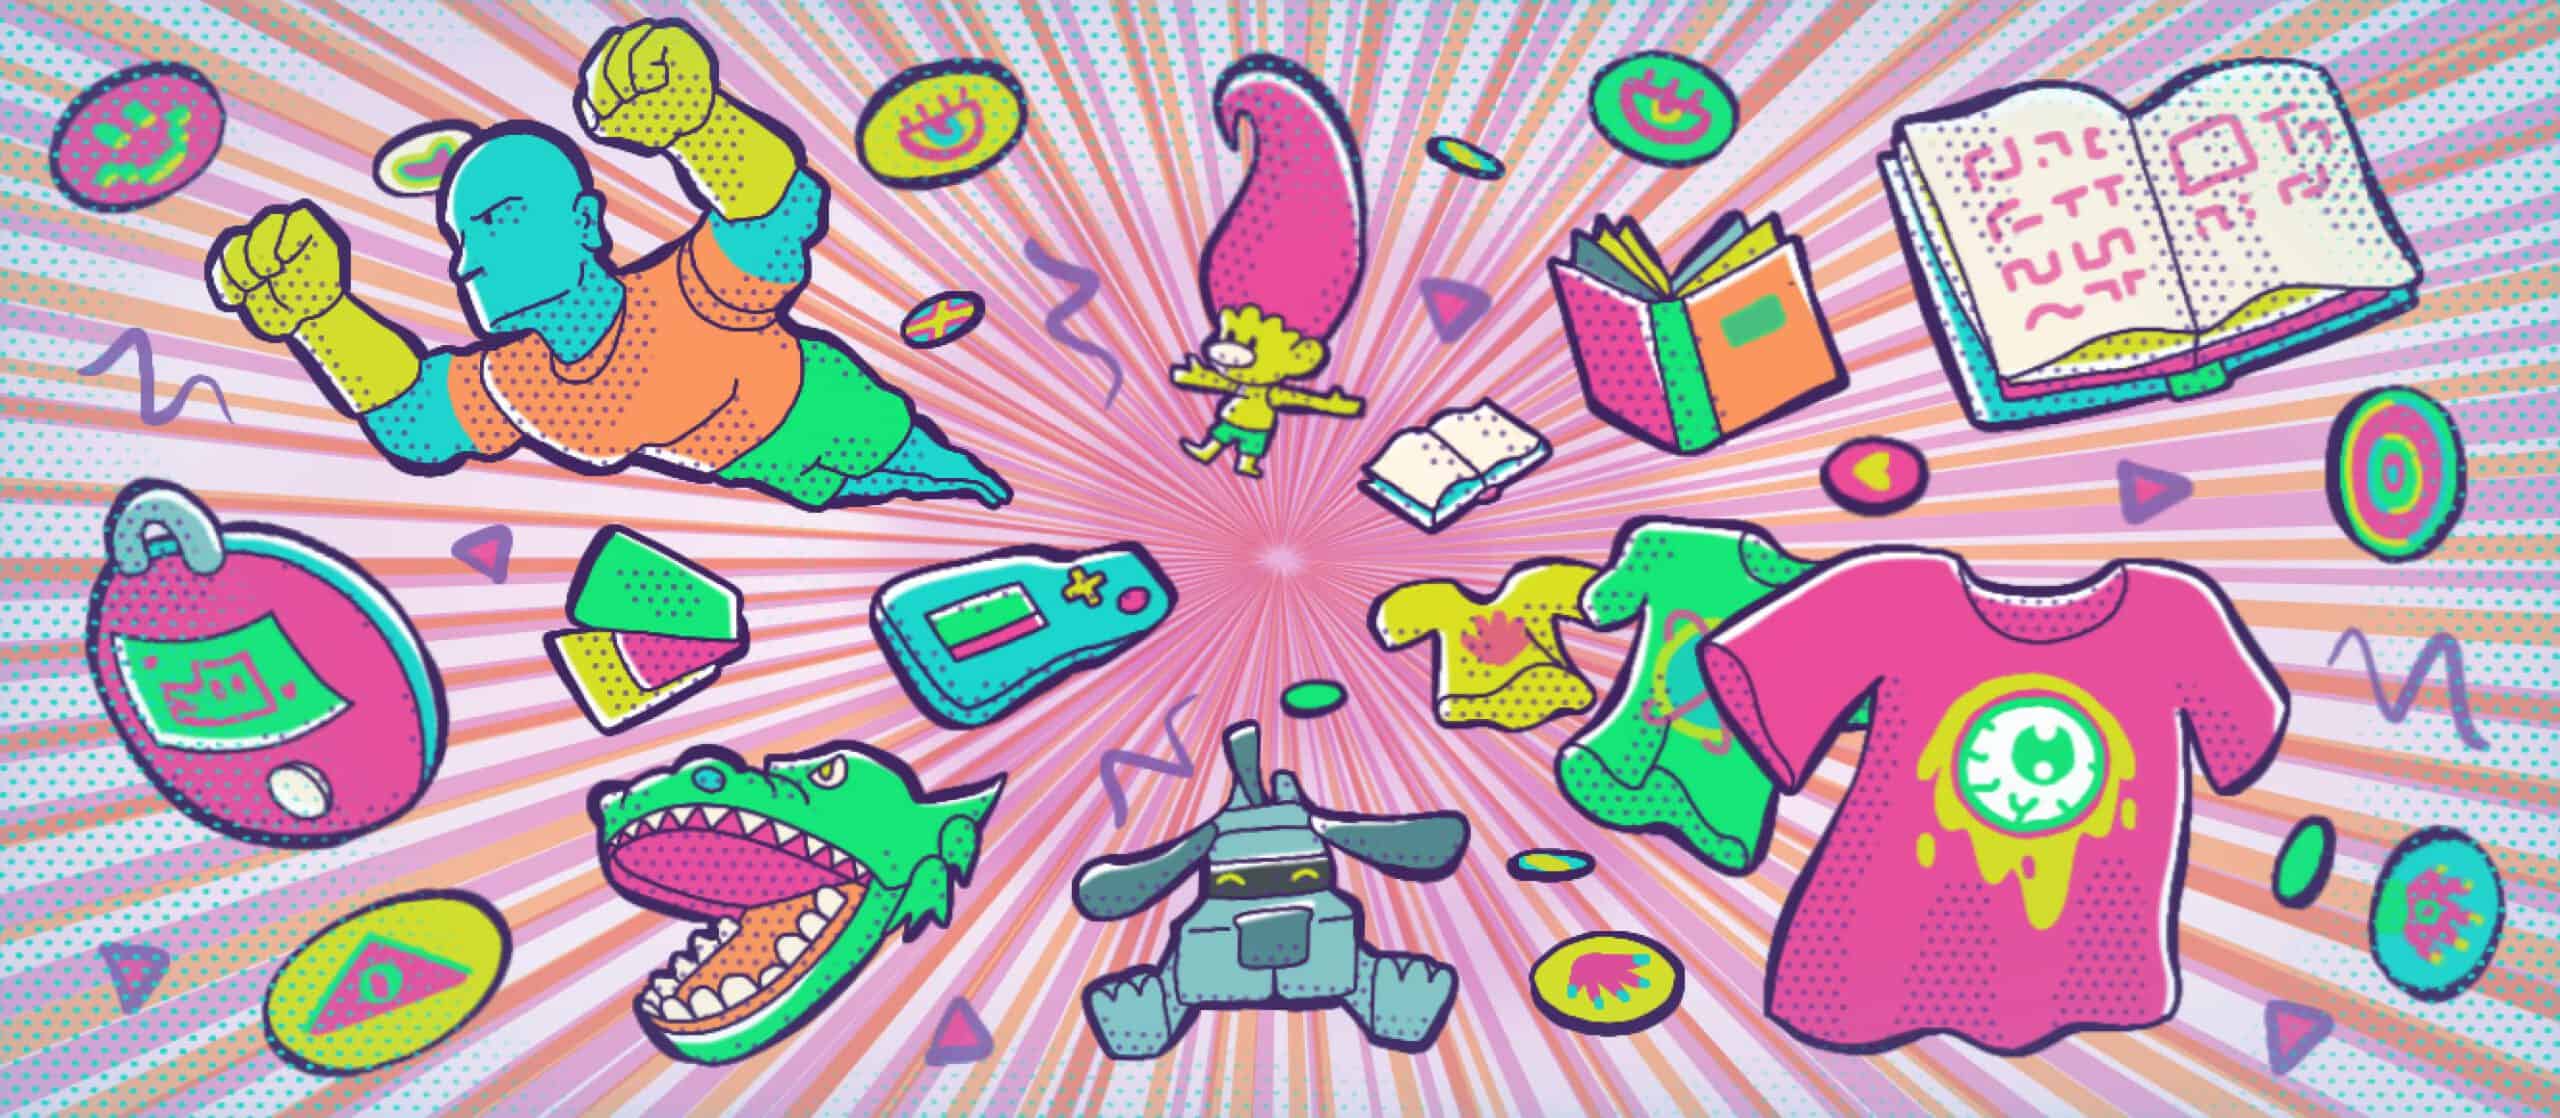 Welcome to 90s Toys - inspired by some of the best toys, games and cartoons ever made